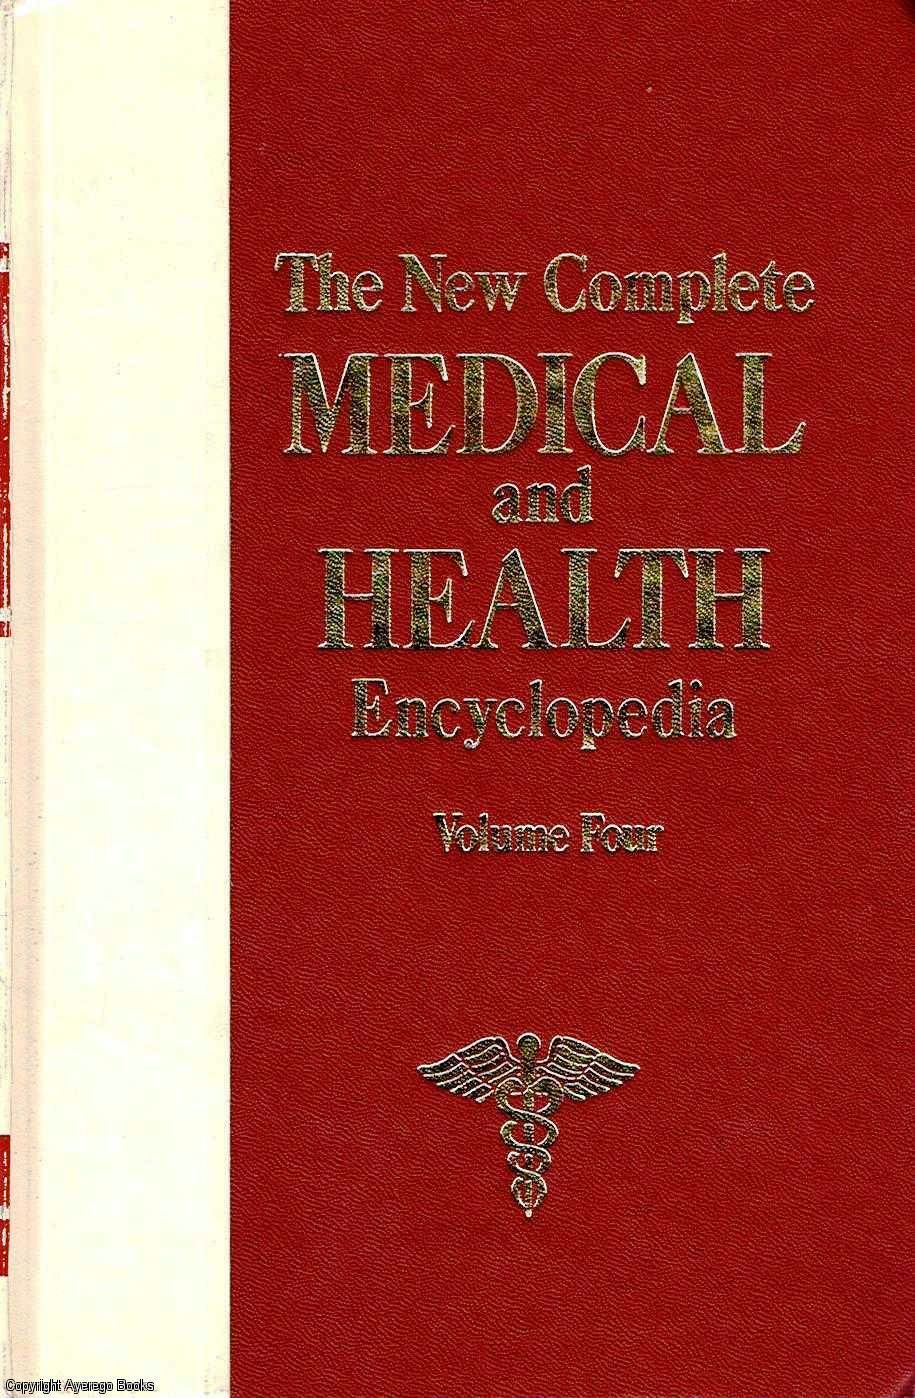 The New Complete Medical and Health Encyclopedia Volume 1